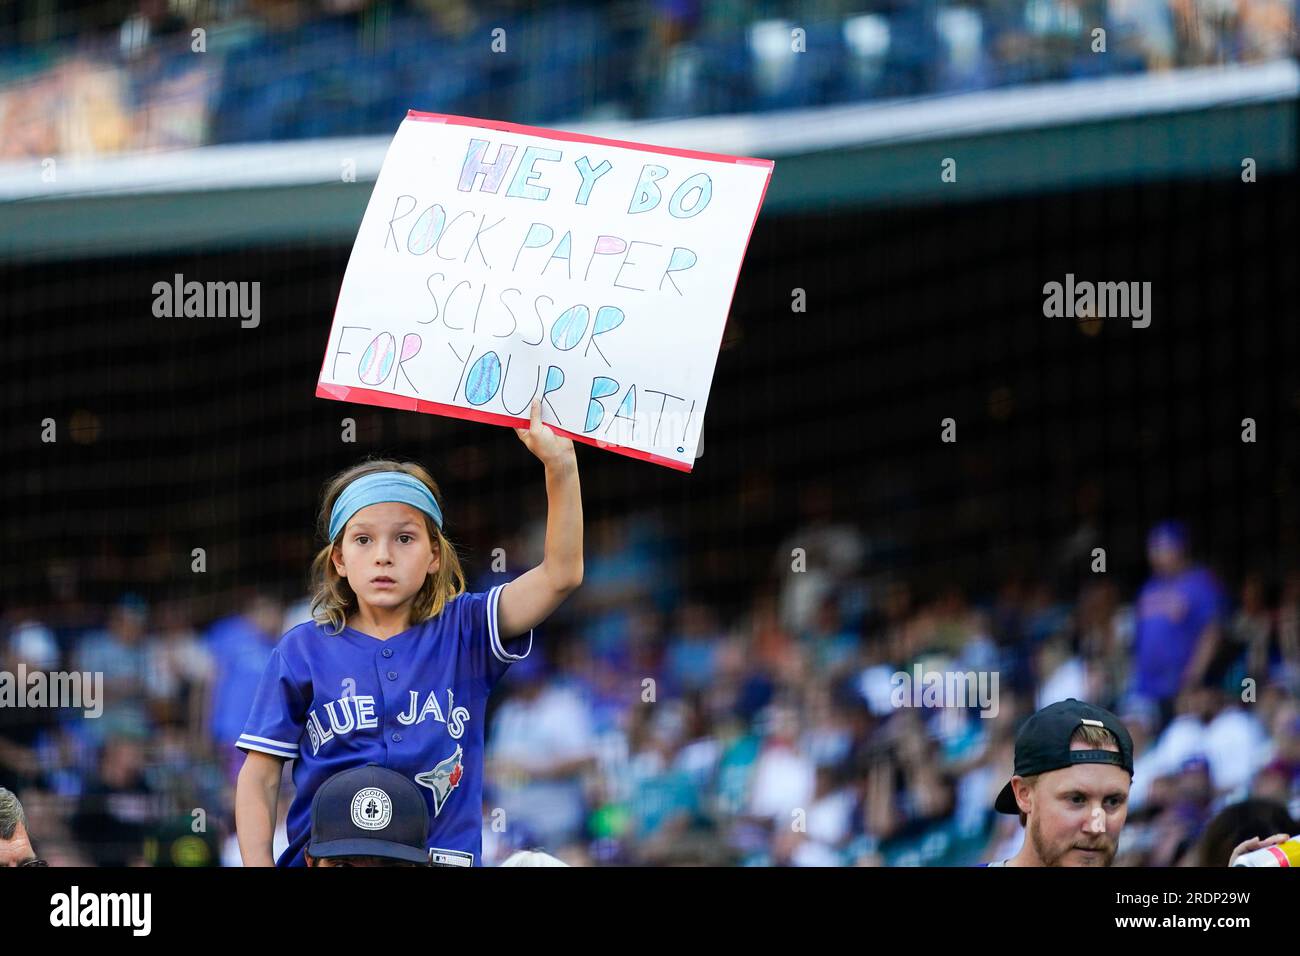 A fan wearing a Toronto Blue Jays jersey holds a sign for